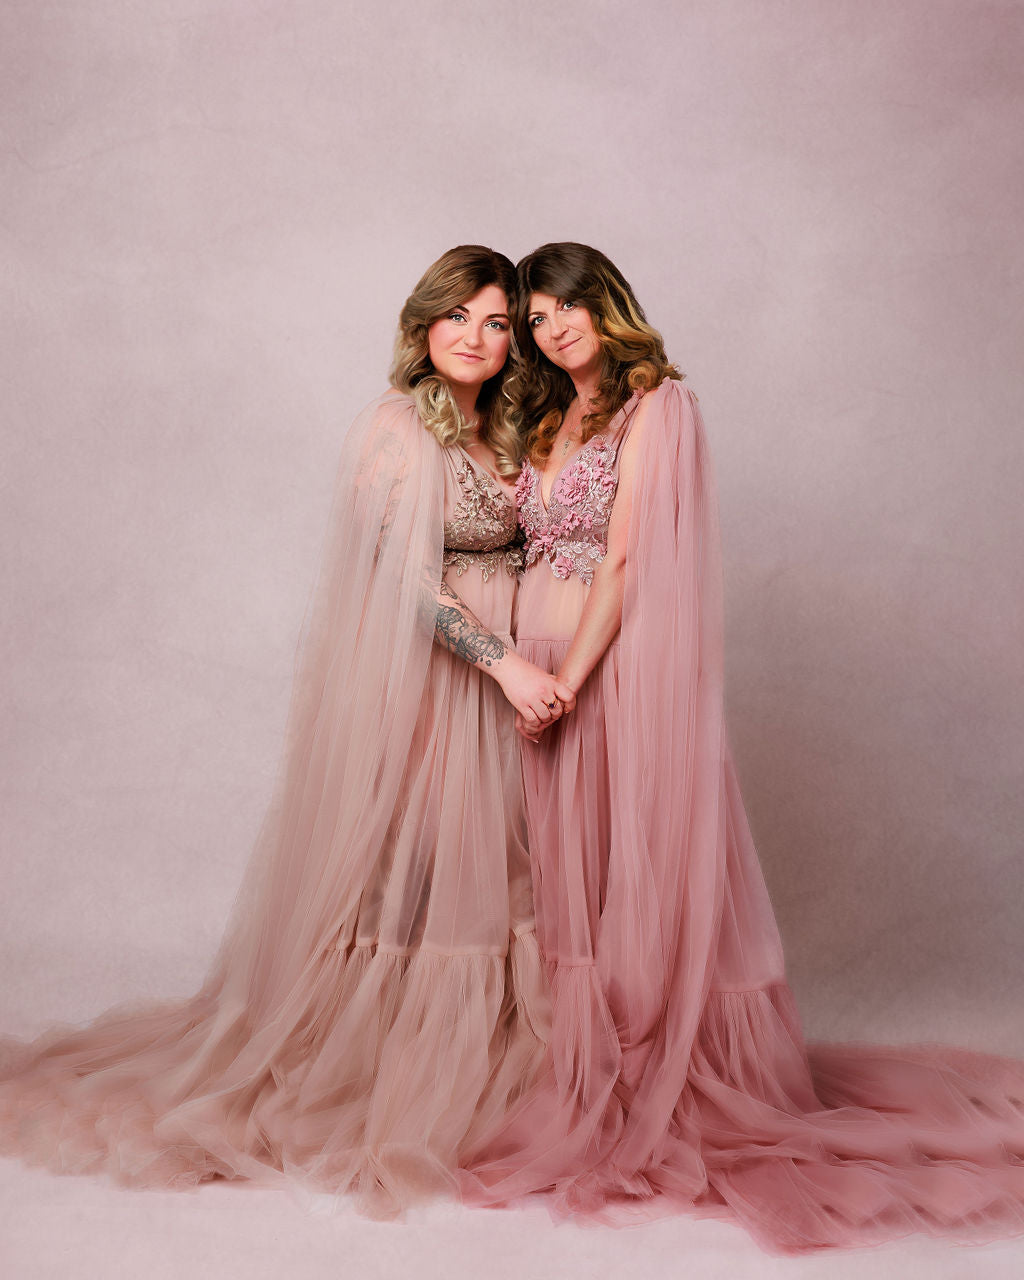 Dusty Pink Wisteria Gown - maternity photoshoot dress